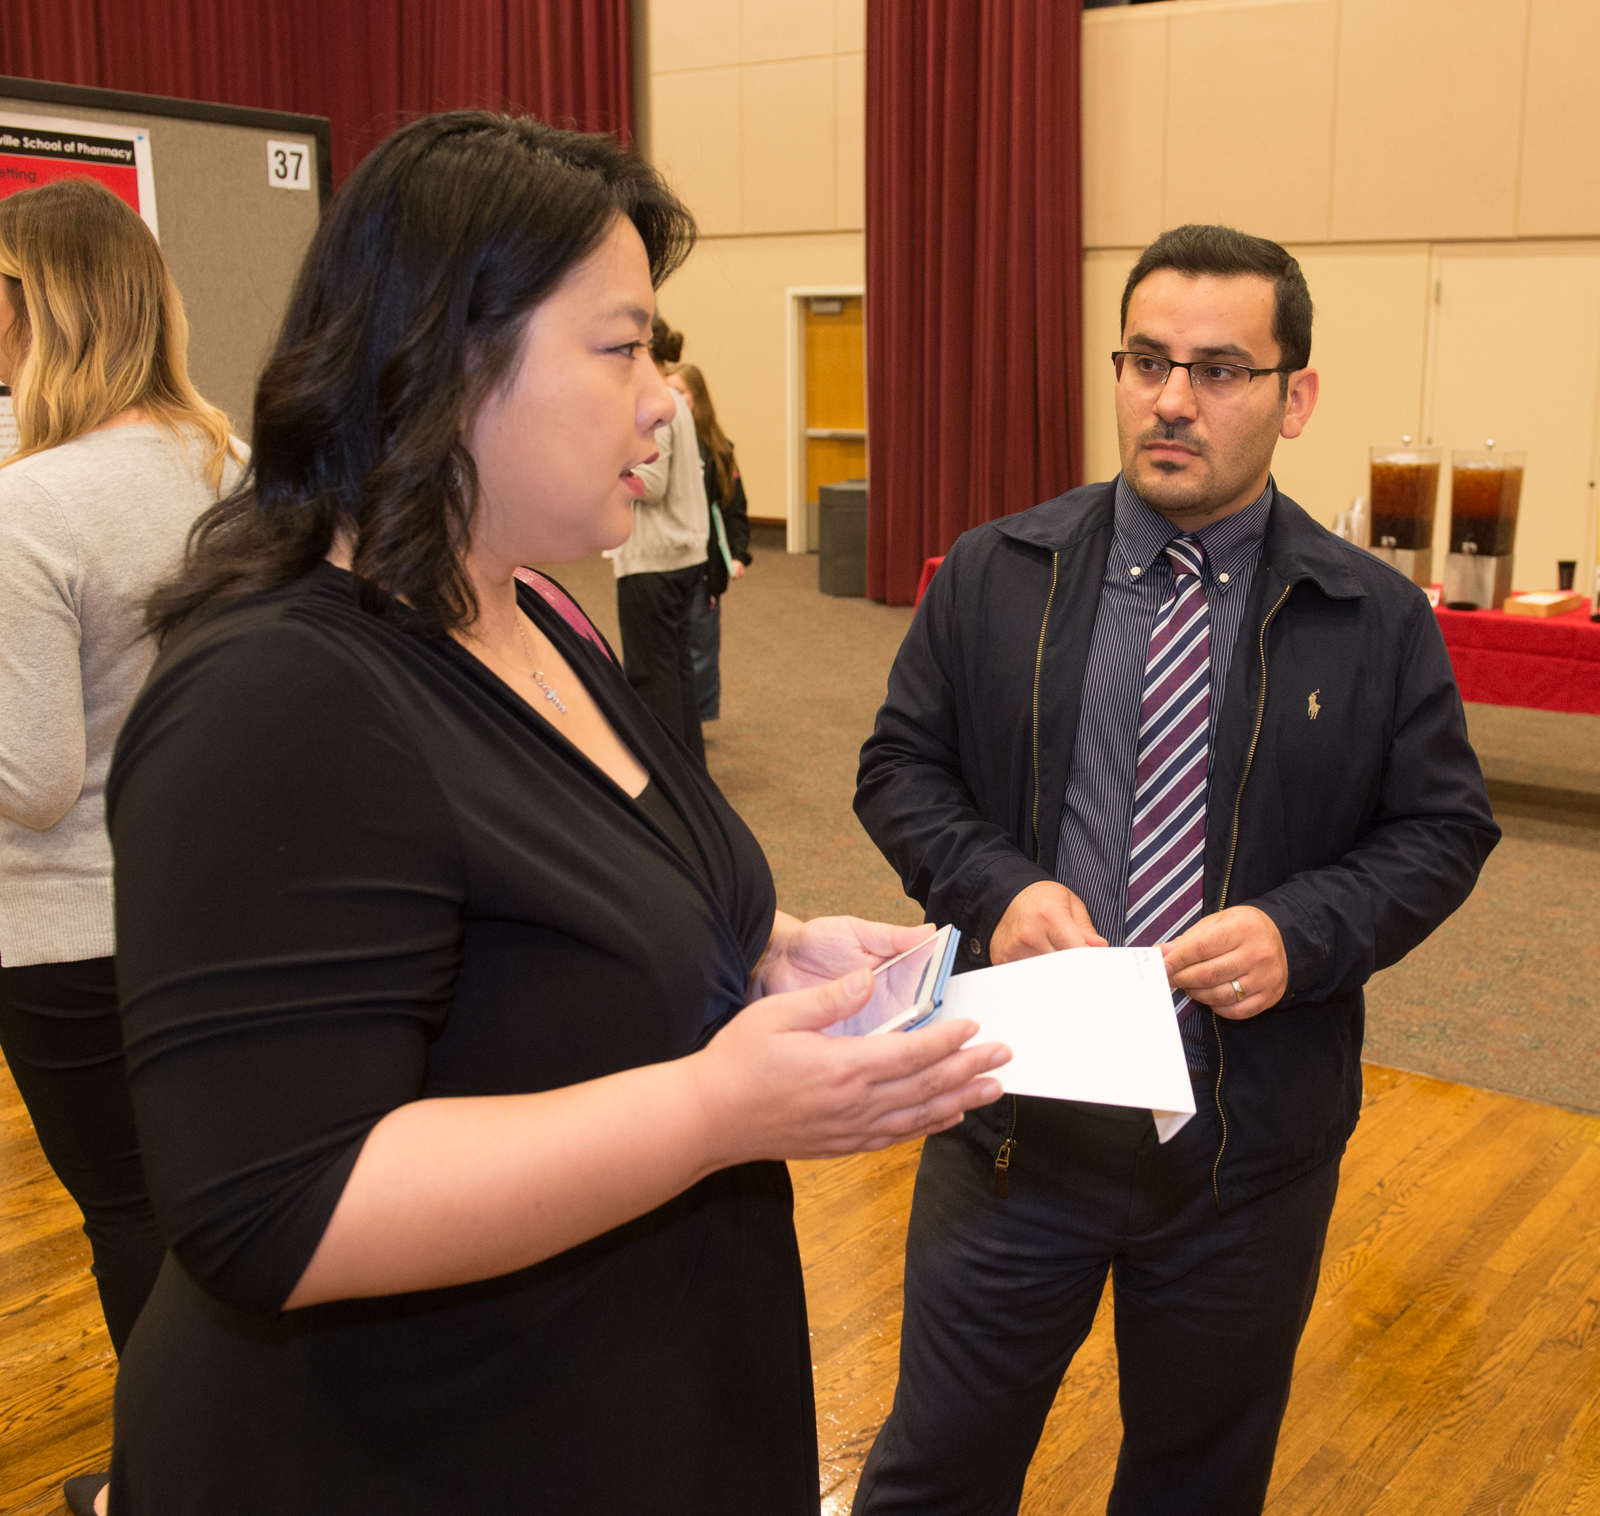 Dr. Fan speaks with Radir Barwari about his Capstone project